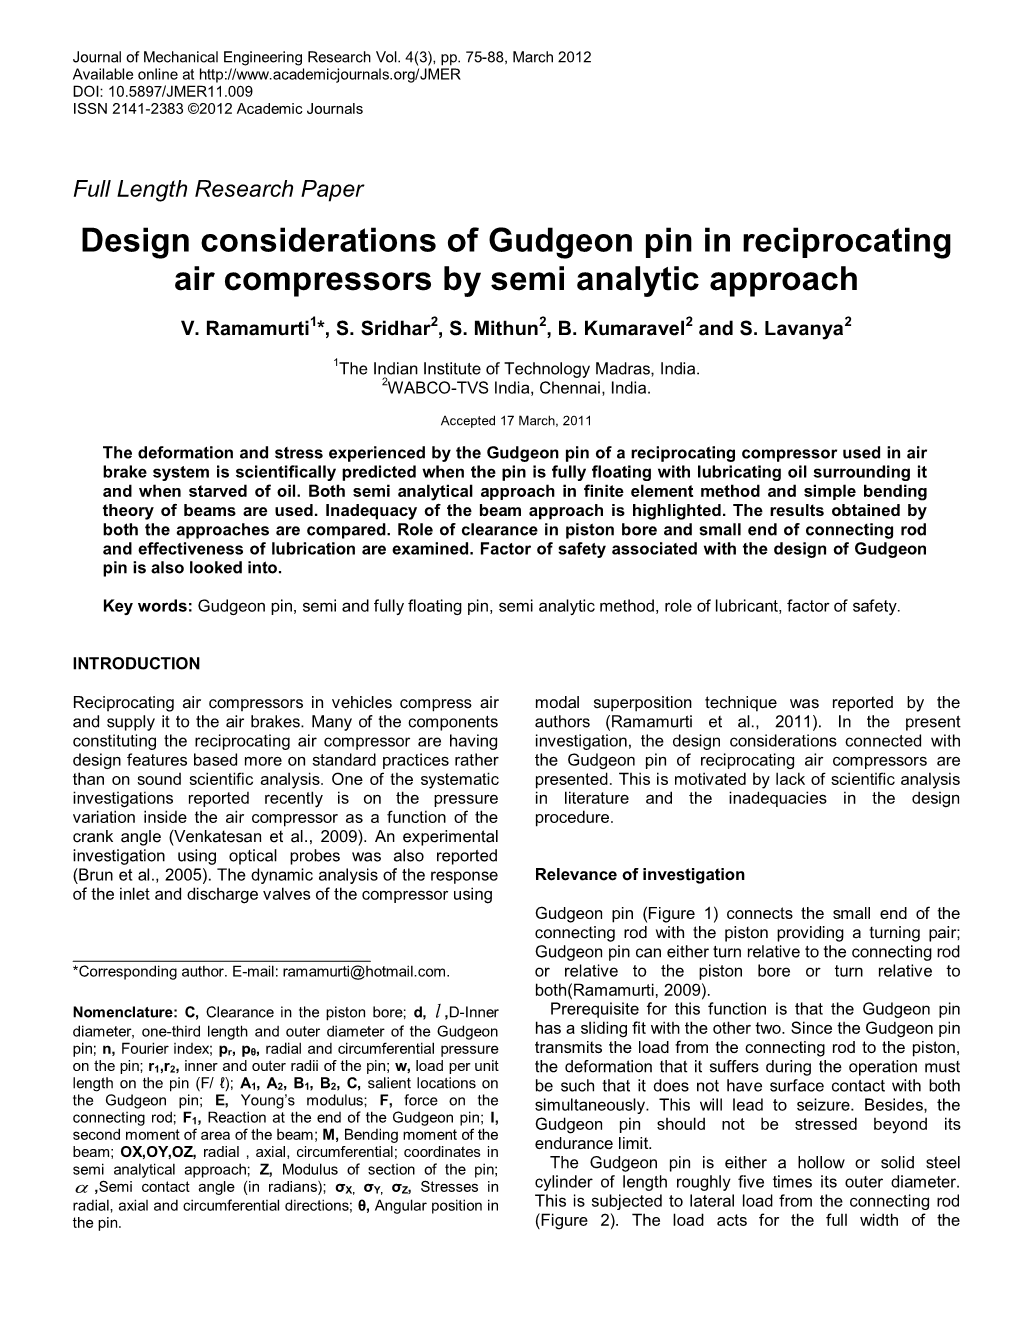 Design Considerations of Gudgeon Pin in Reciprocating Air Compressors by Semi Analytic Approach